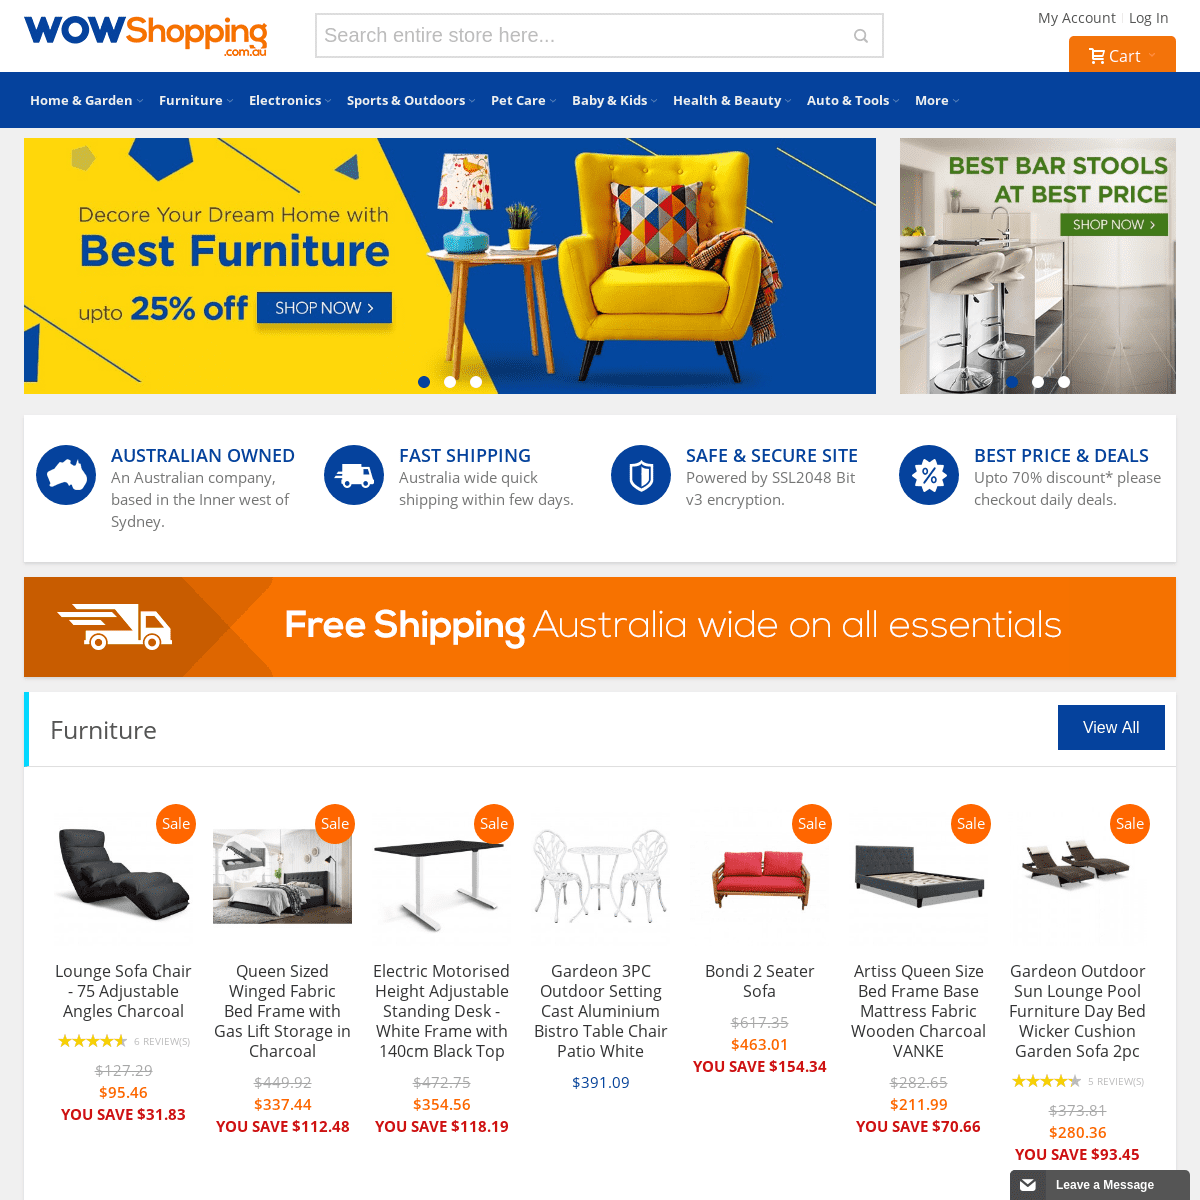 A complete backup of wowshopping.com.au